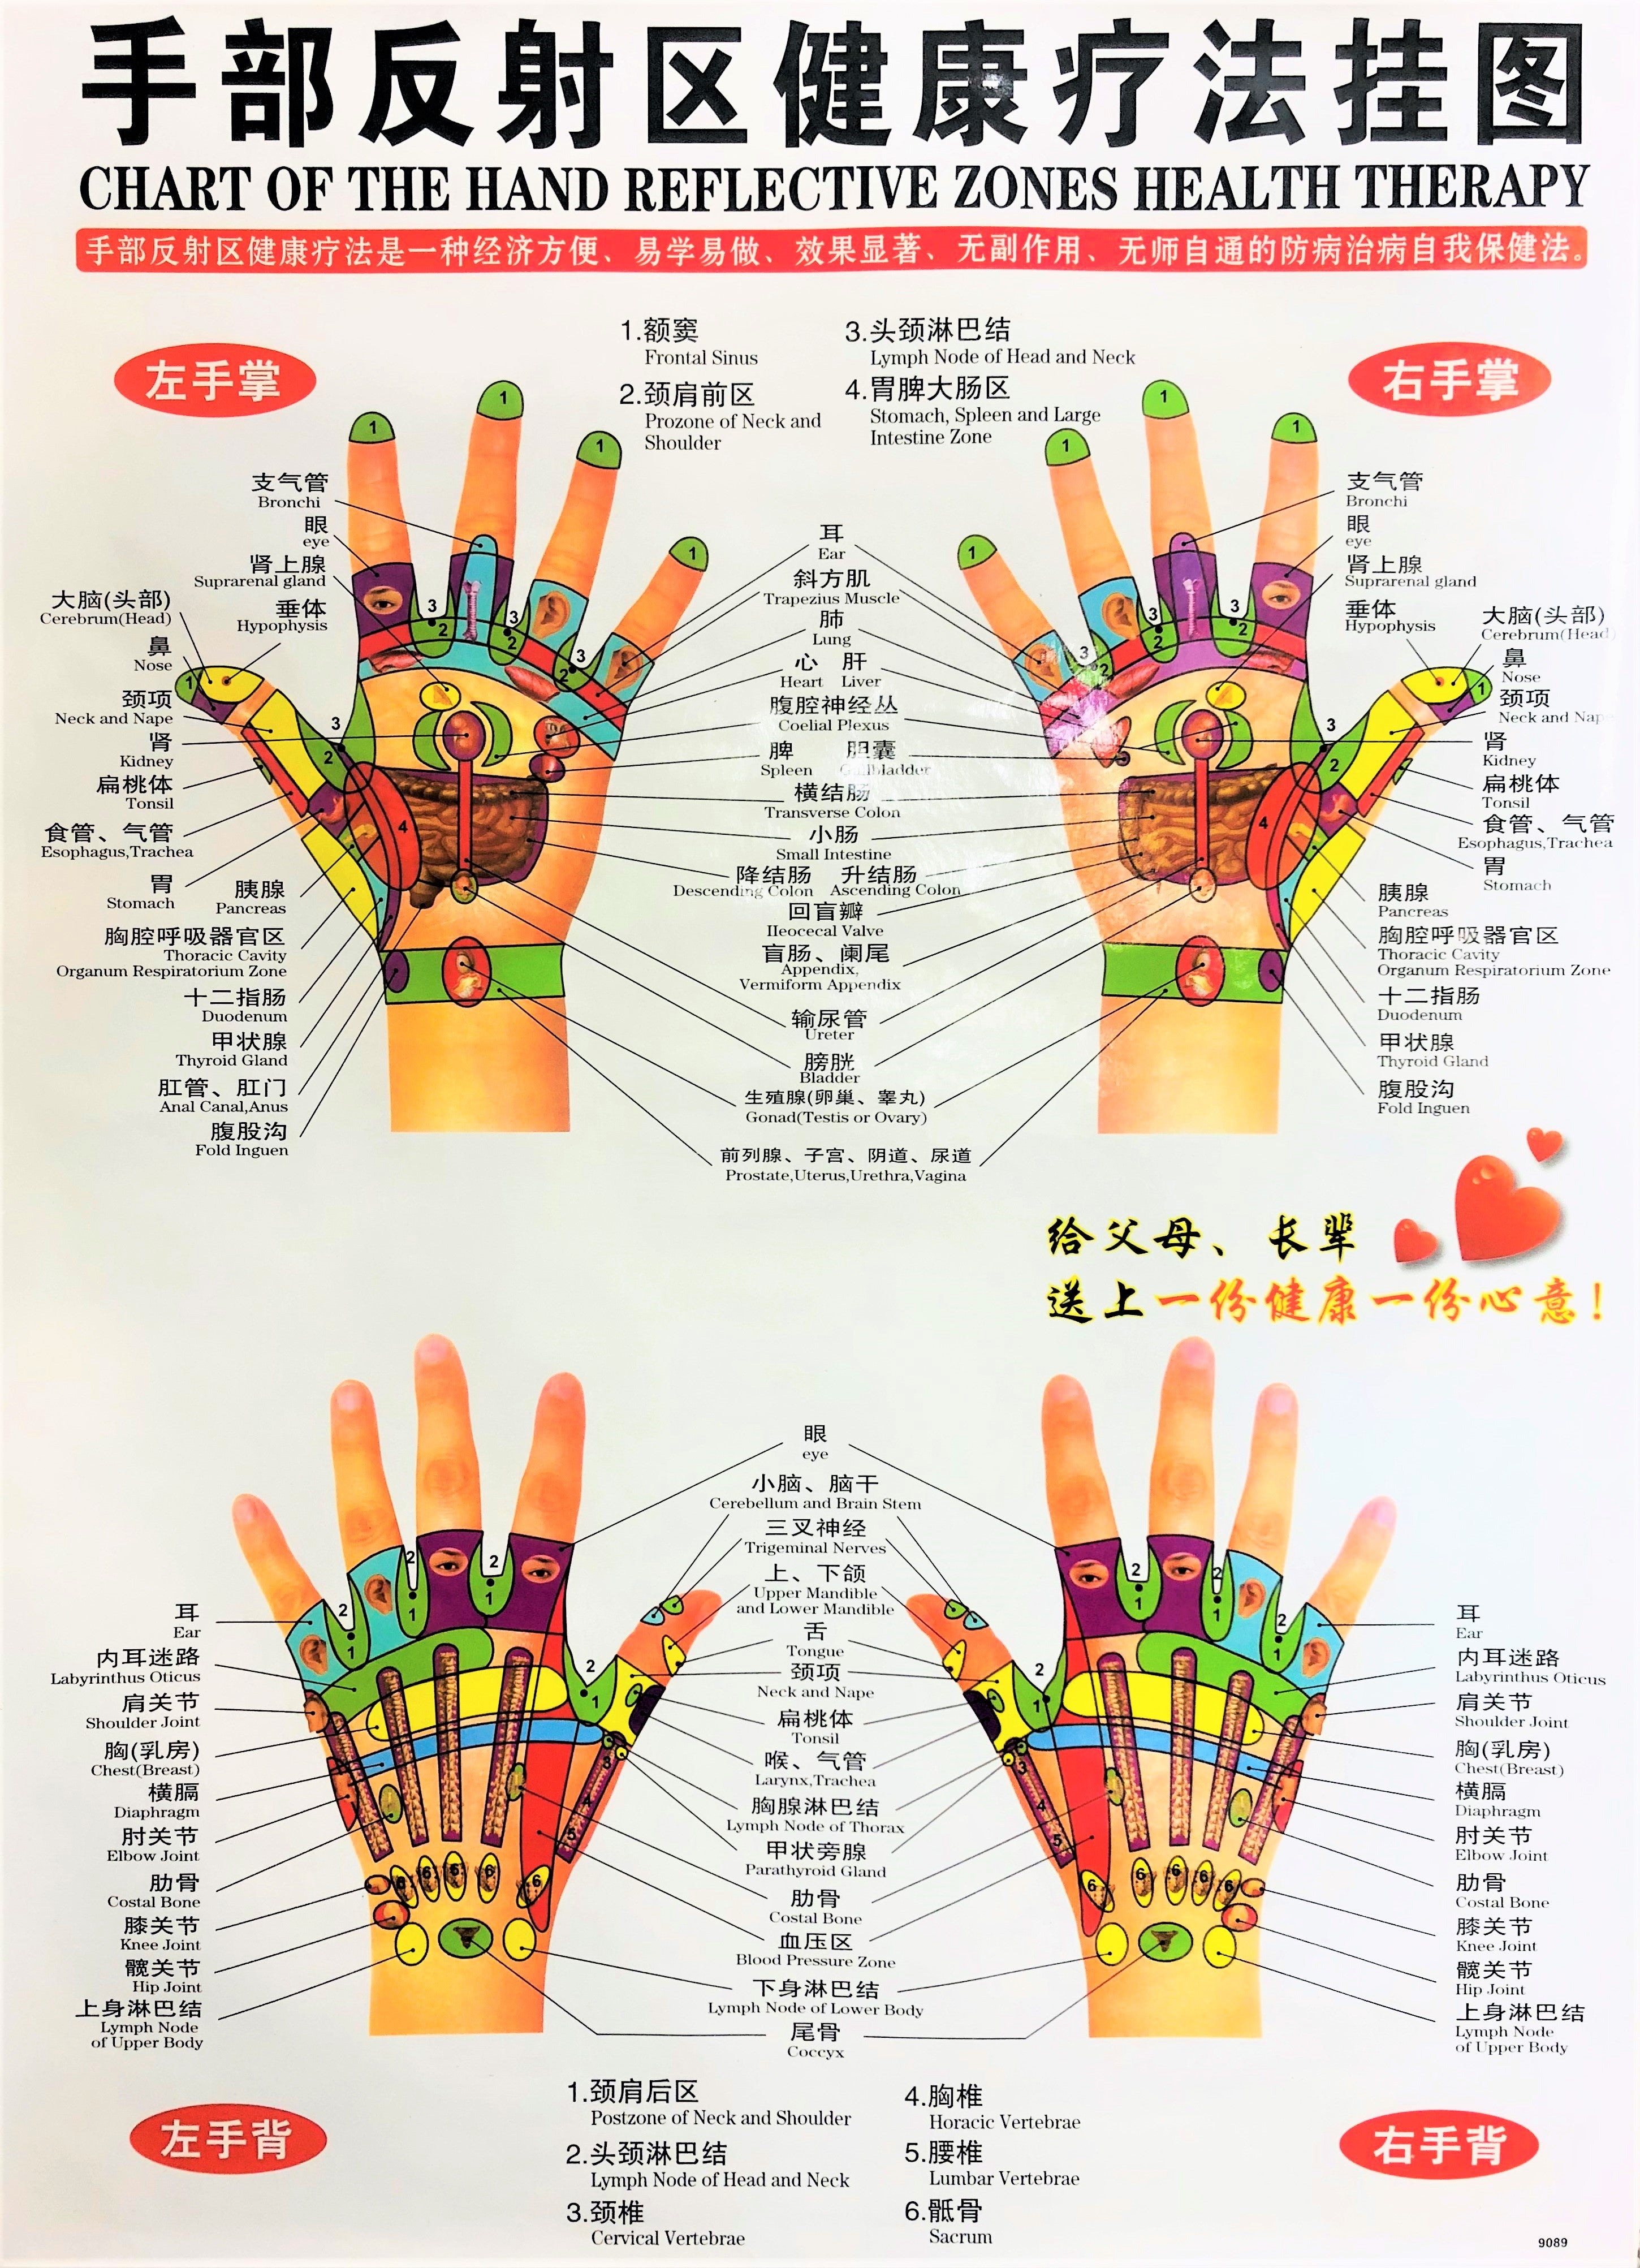 Chart of the Hand Reflective Zones Health Therapy 手部反射区健康疗法挂图 – The